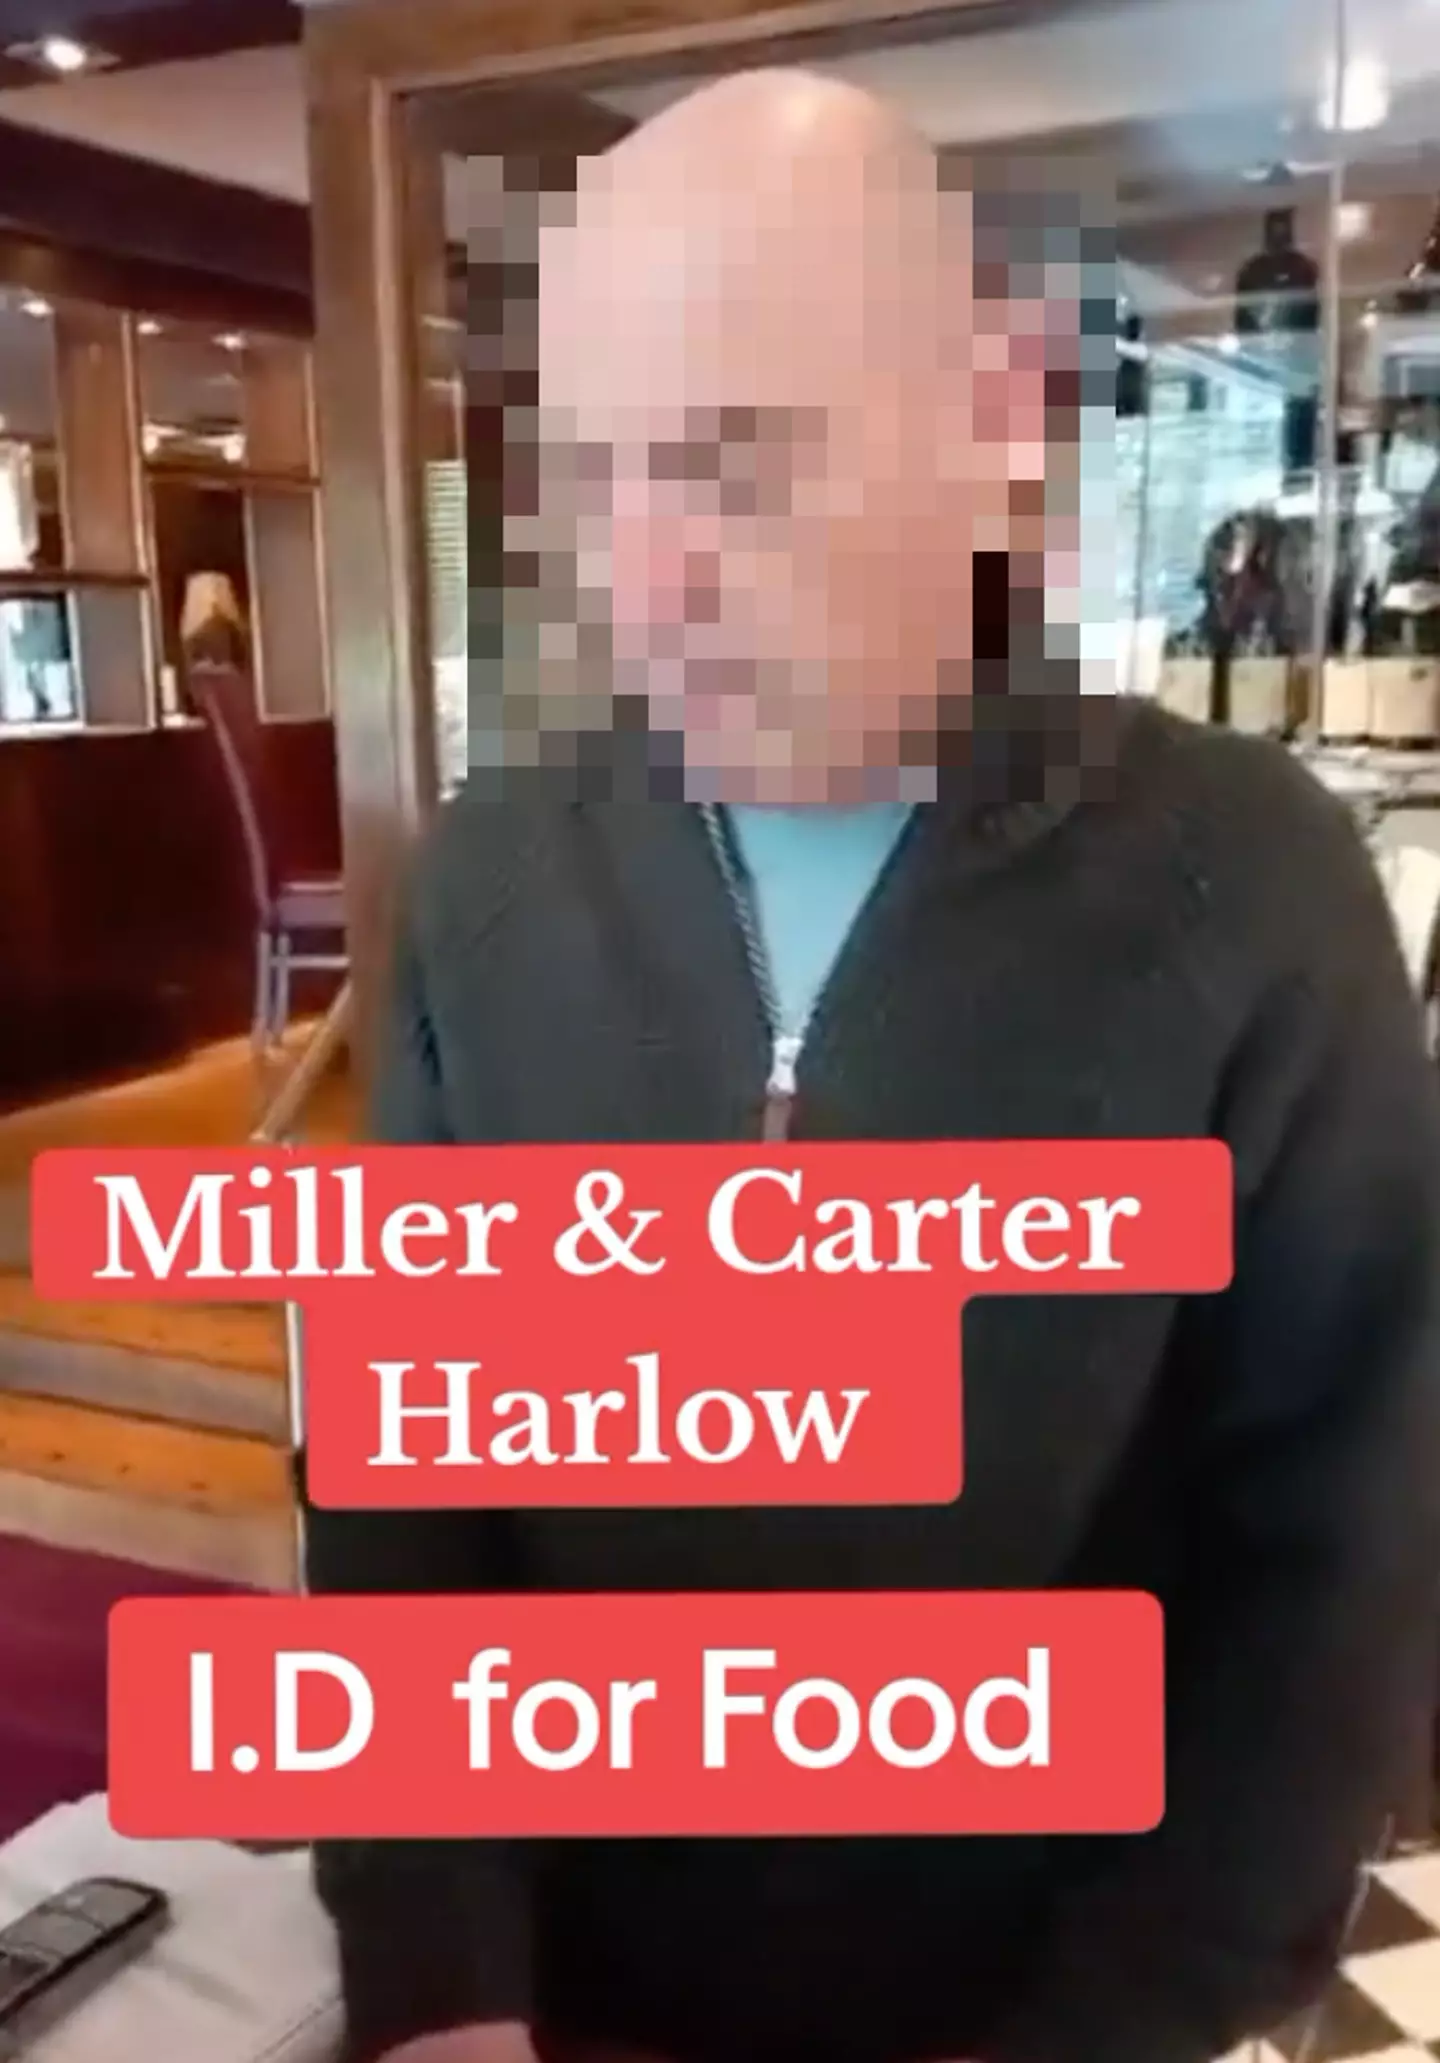 The manager asked for ID to eat at the restaurant. (TikTok)